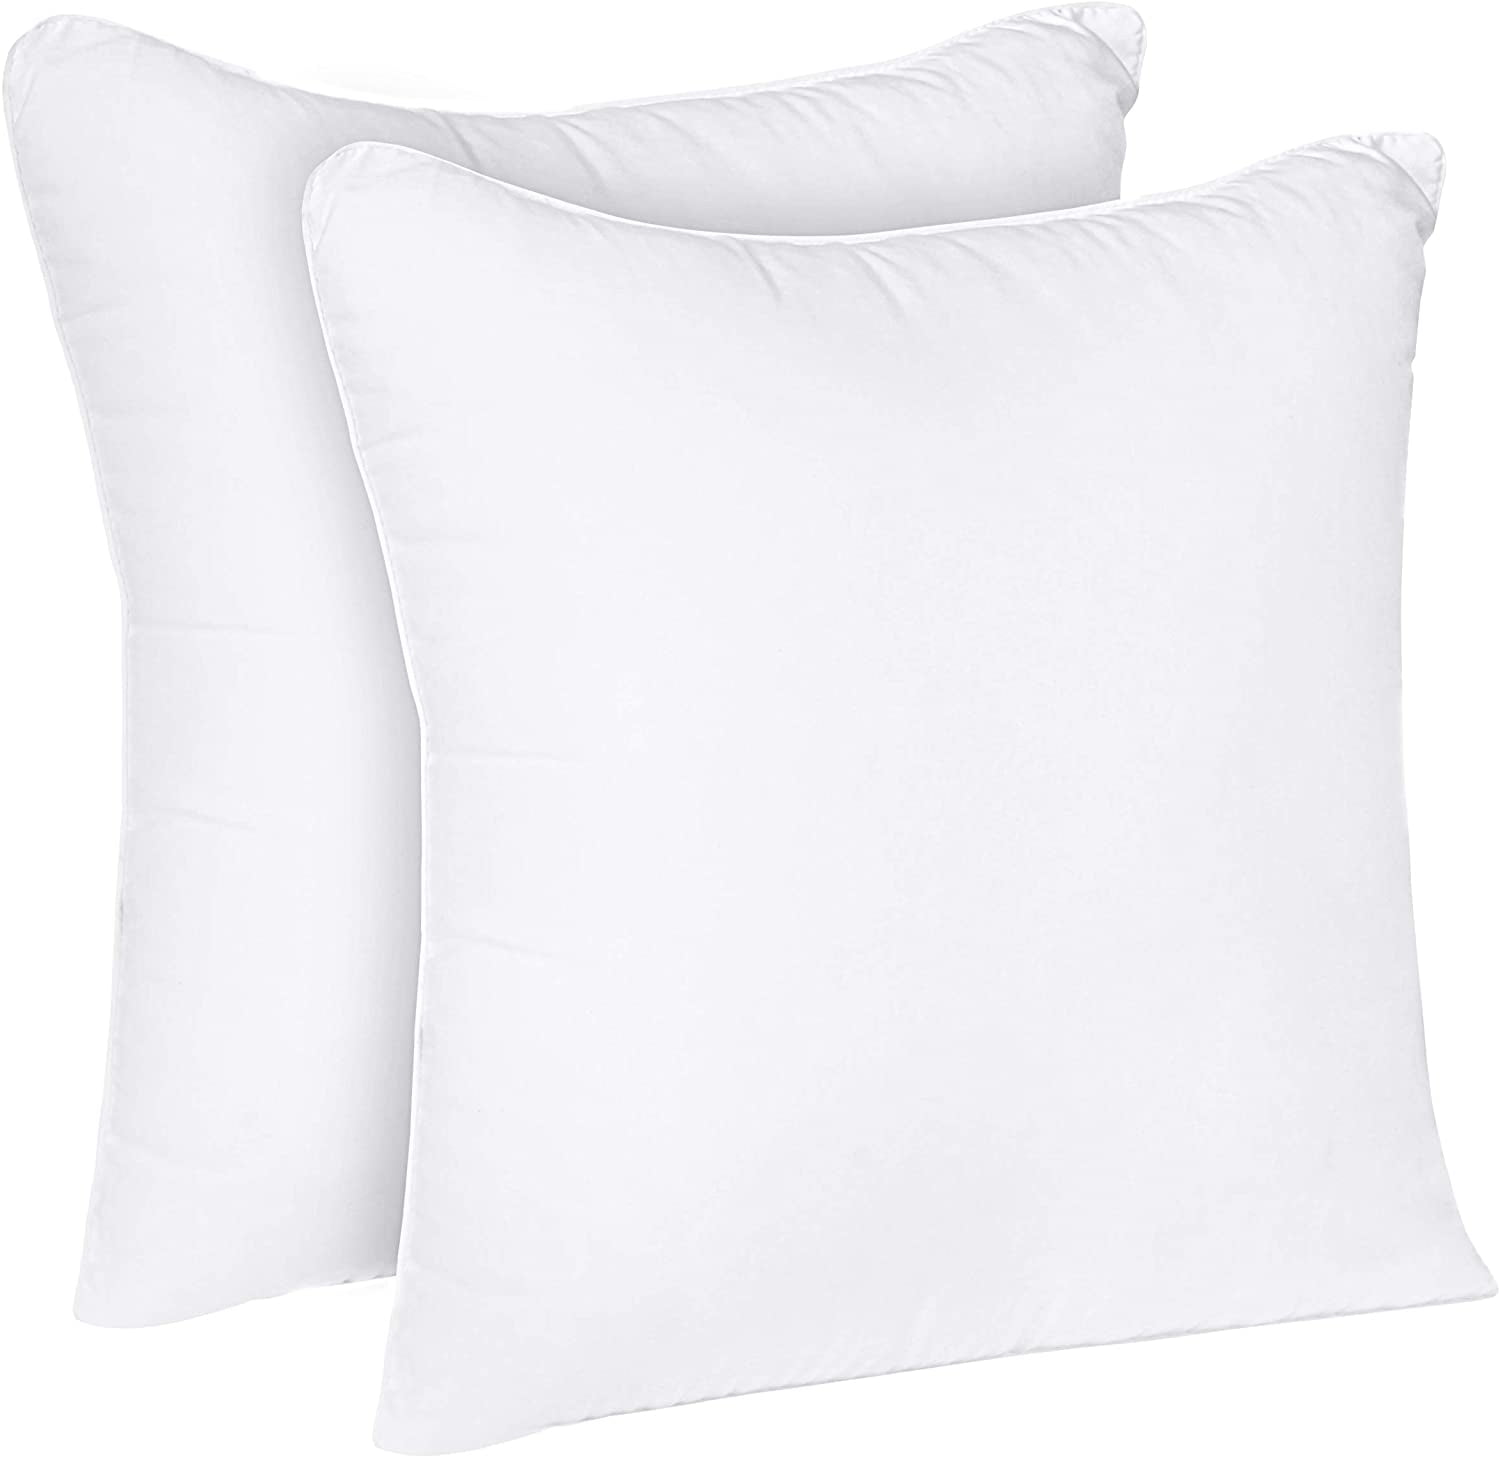 LEMONWORLD 18 x 18 Throw Pillow Inserts Outdoor Pillow Insert Waterproof  for Couch - Set of 2 Large Lumbar Pillows for Bed Square Couch Pillows  White